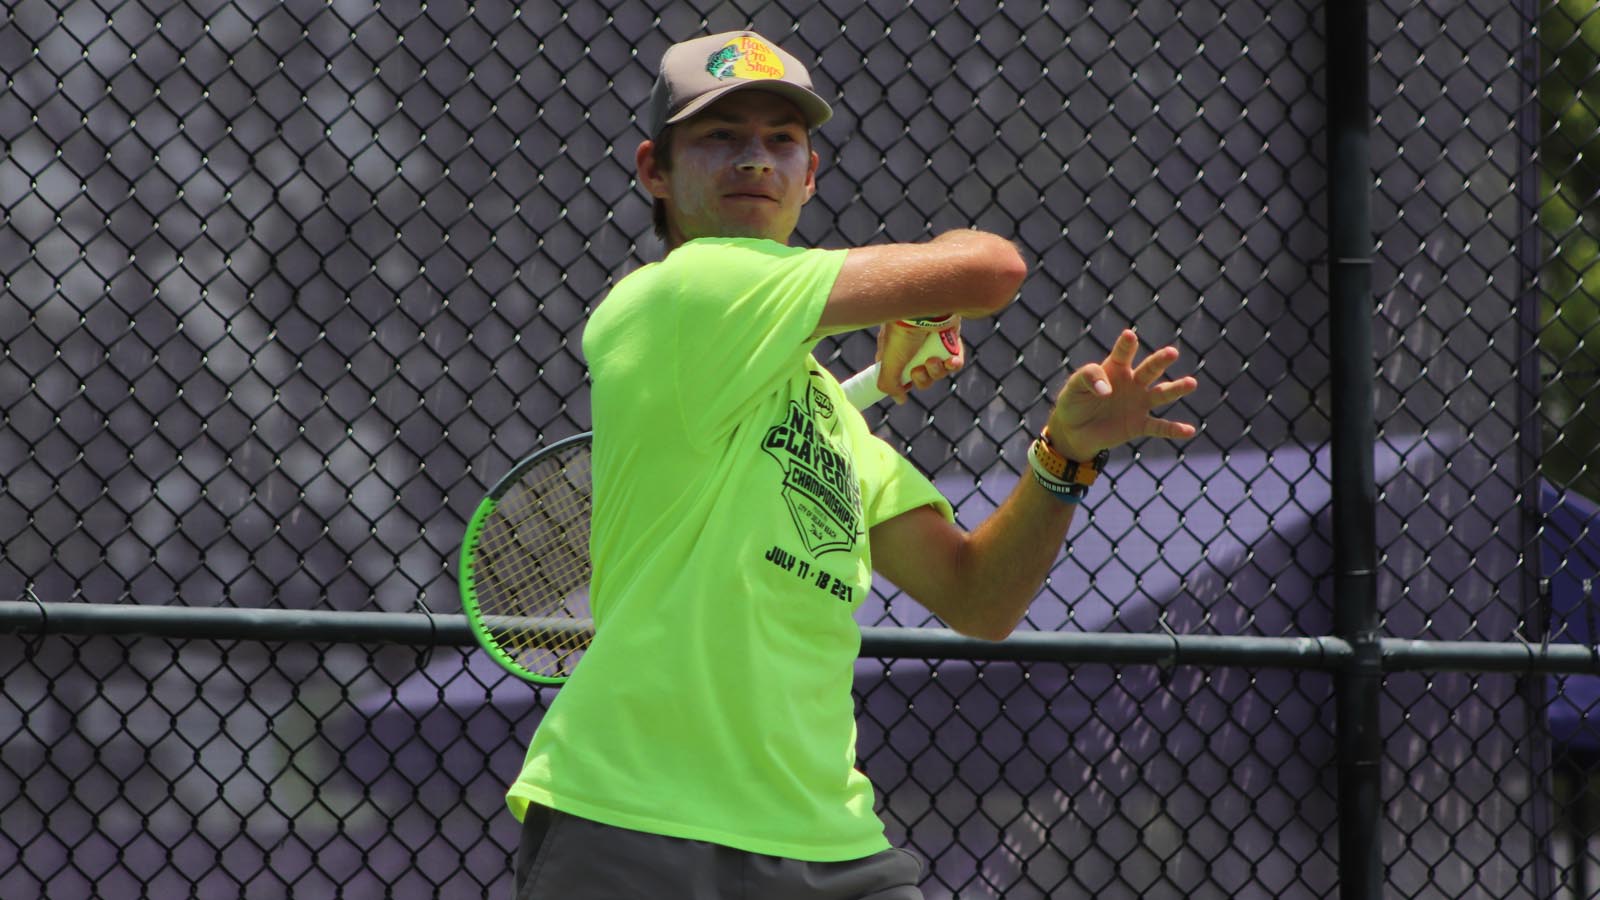 UTR Pro Tennis Tour Players Gorzny, Michelsen, and More Dominate at Ju